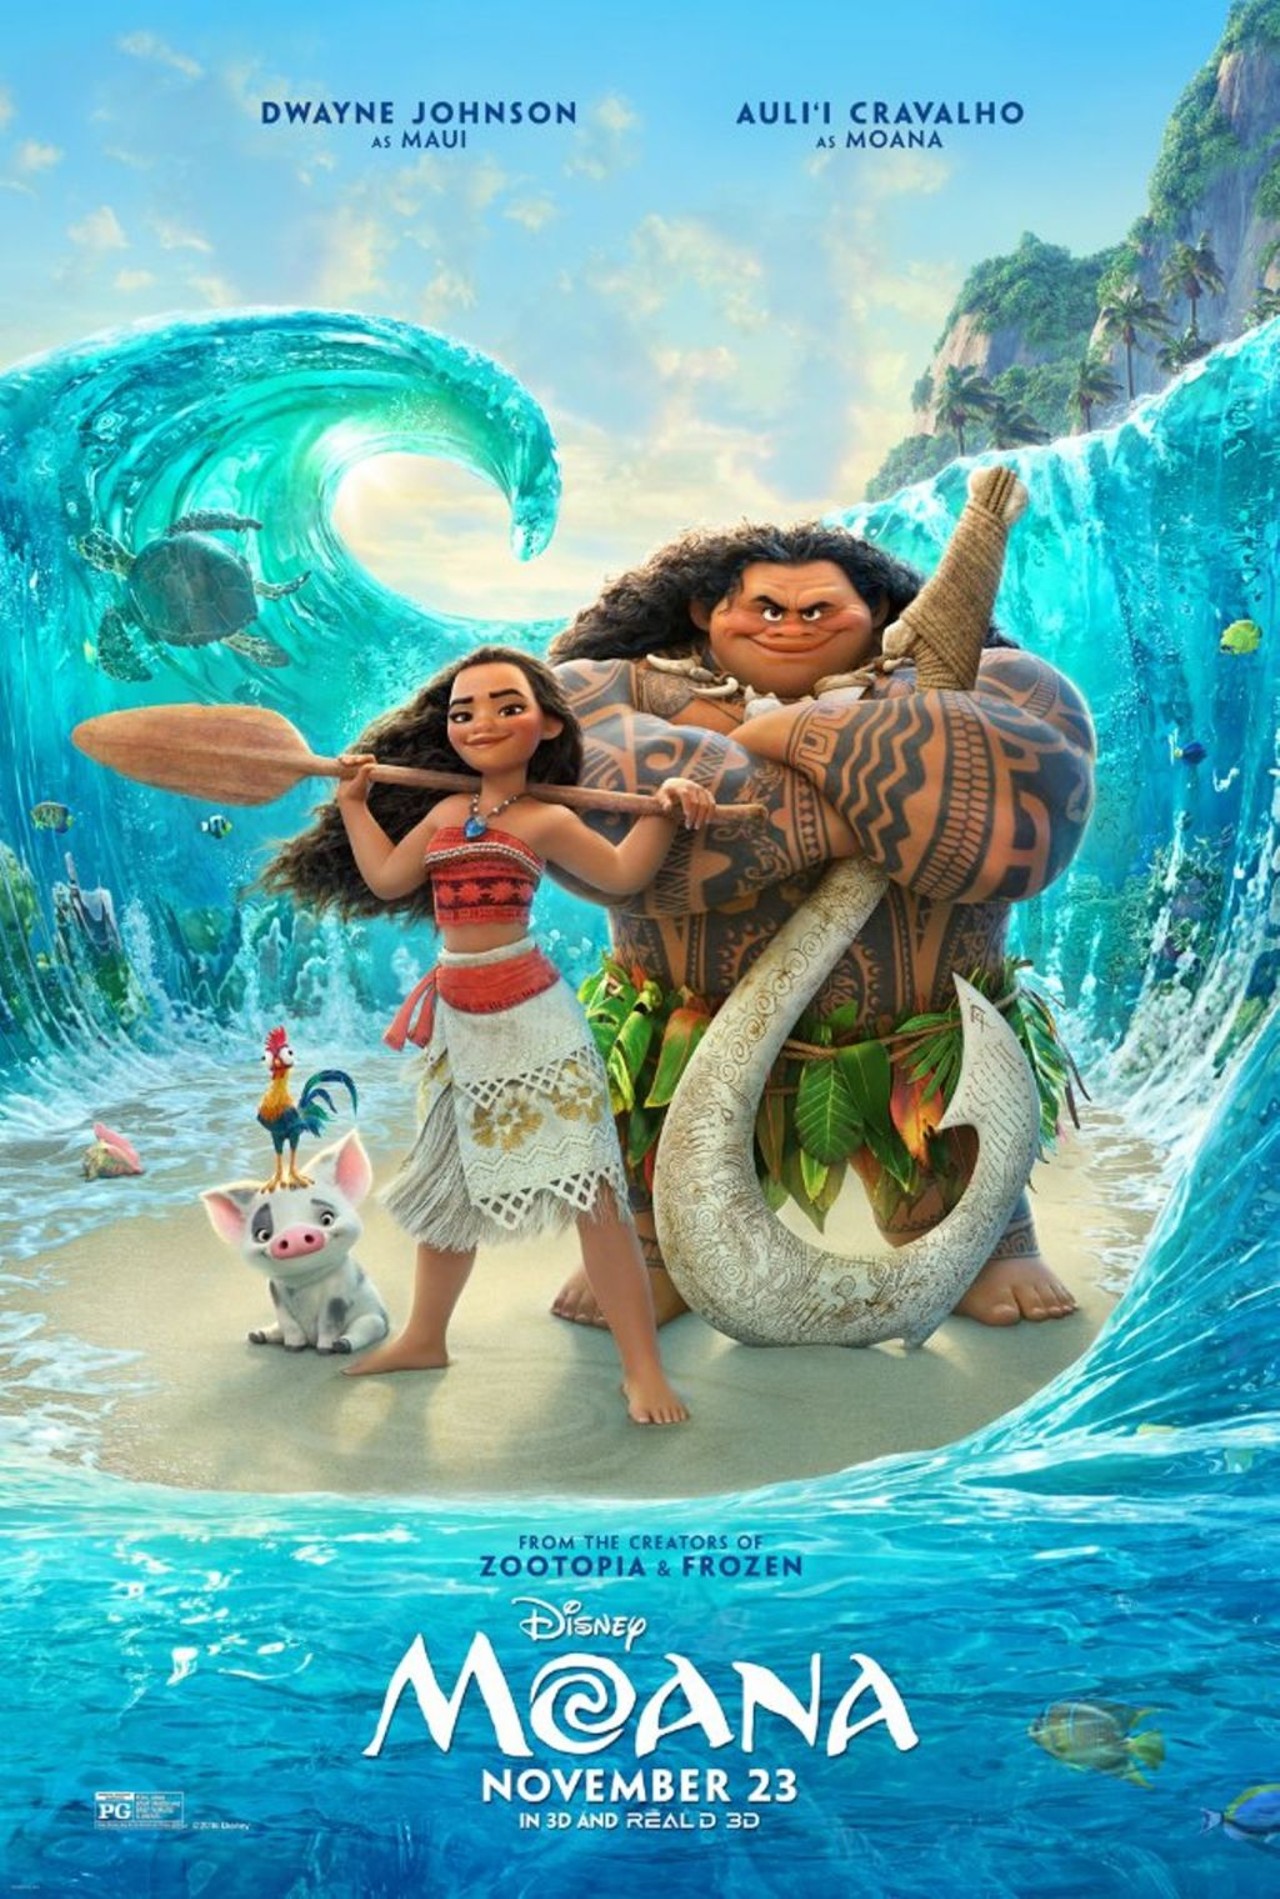  City of Leon Valley Movies in the Park: Moana 
Raymond Rimkus Park, Leon Valley, 6440 Evers Road